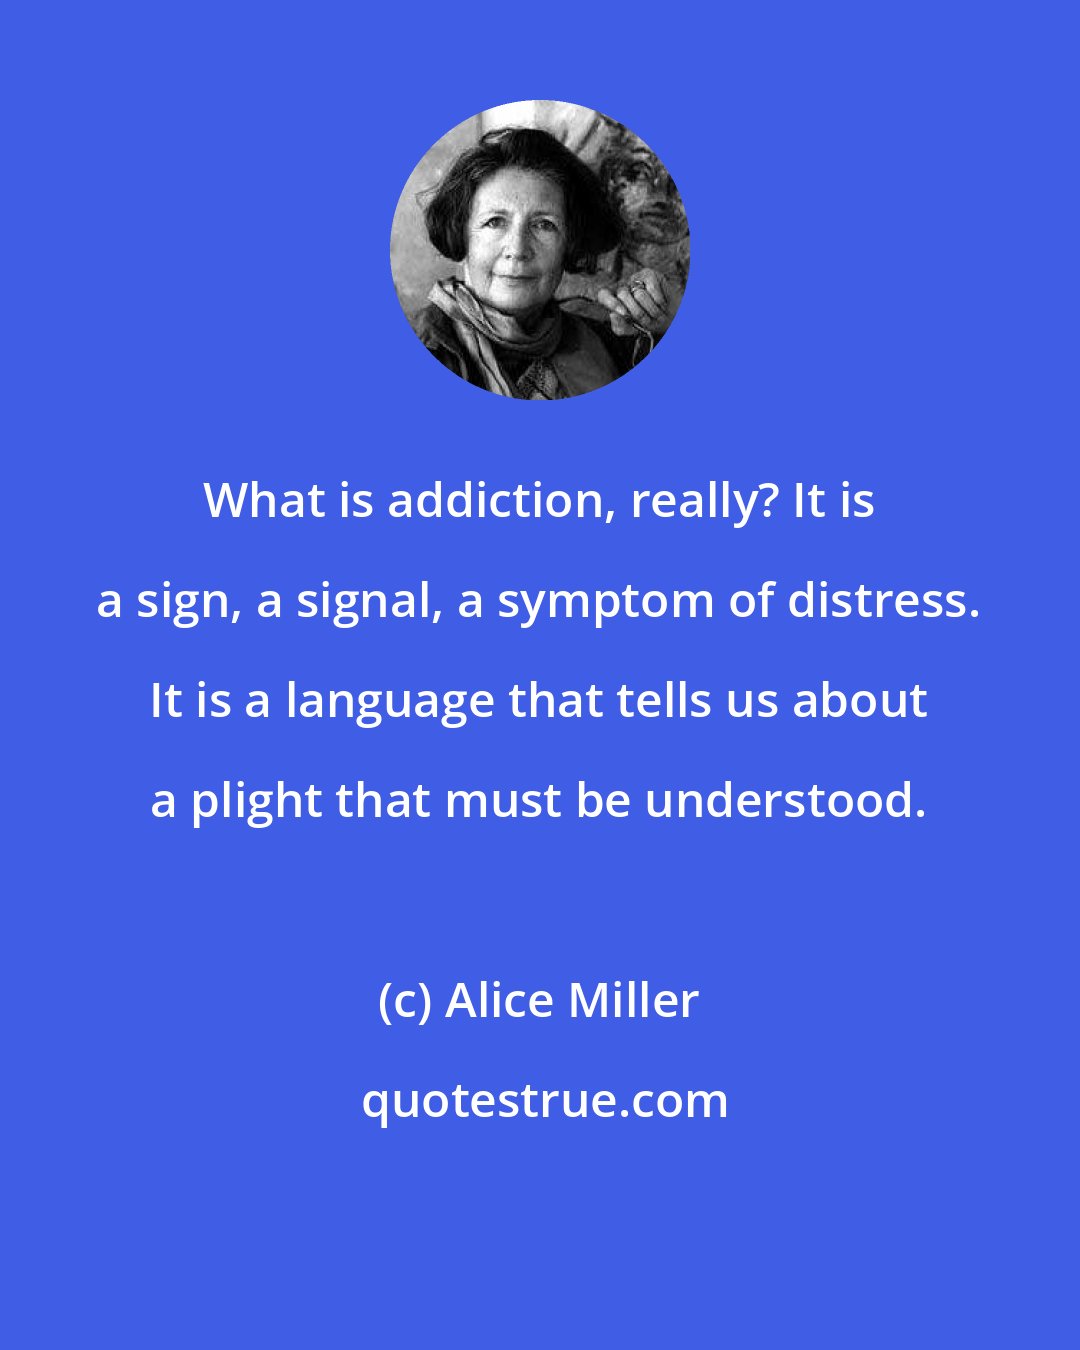 Alice Miller: What is addiction, really? It is a sign, a signal, a symptom of distress. It is a language that tells us about a plight that must be understood.